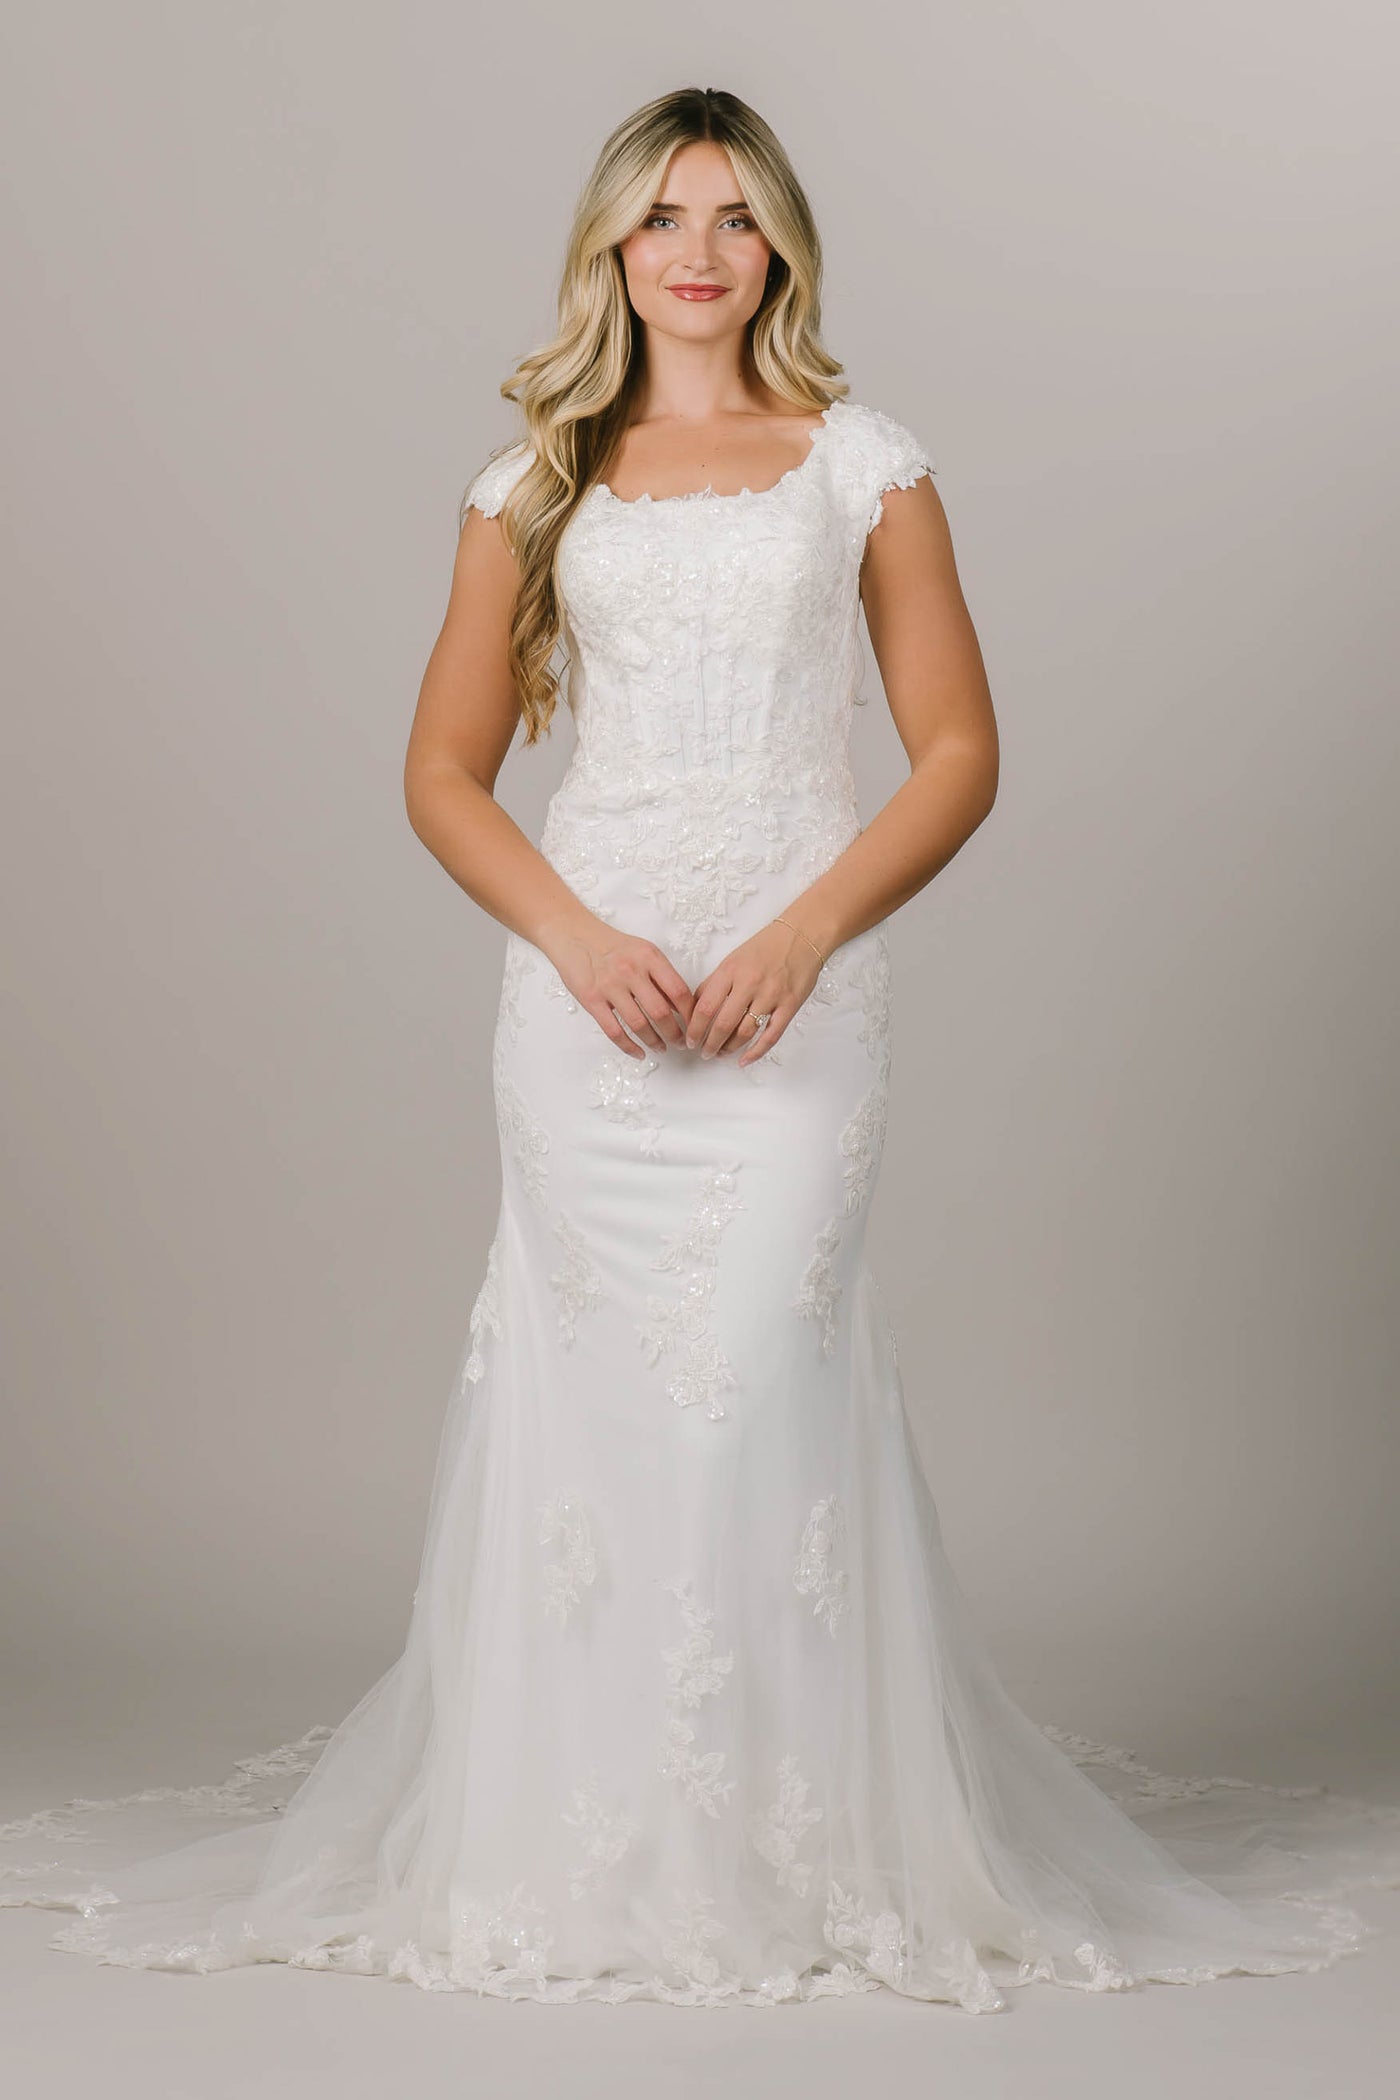 This is a modest wedding dress with visible boning and lace bodice.